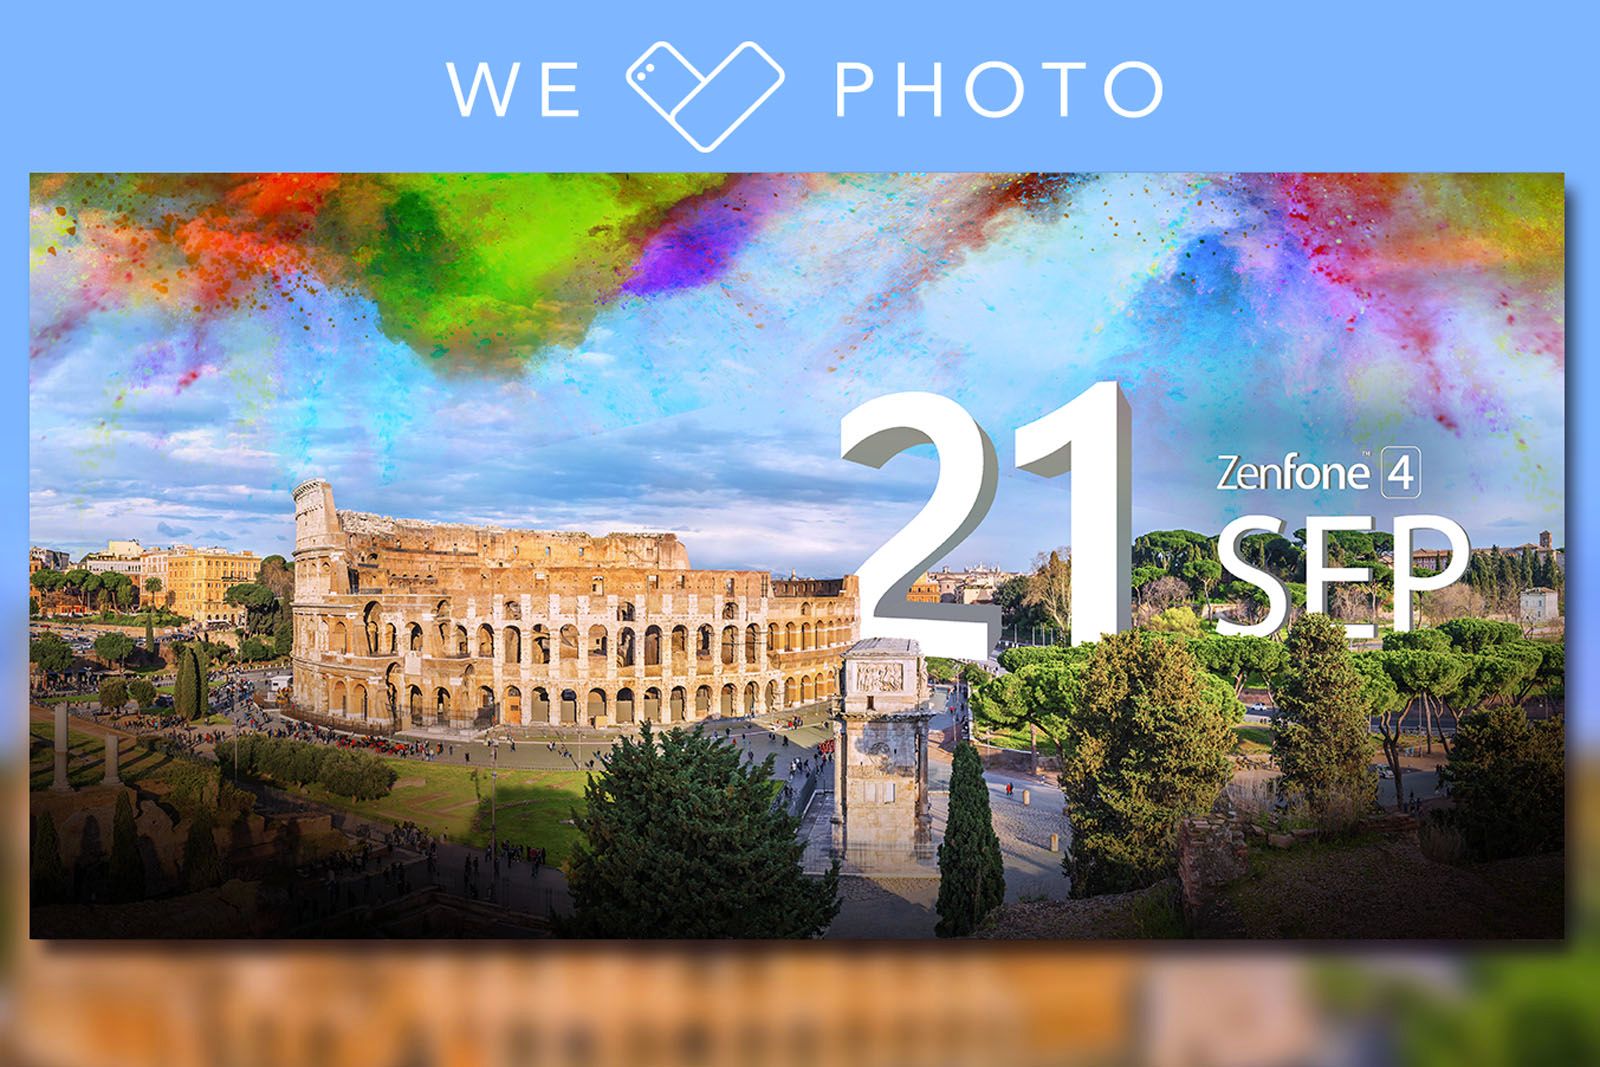 Can I watch the Asus Zenfone 4 launch online and what should I expect from the We Love Photo event image 1